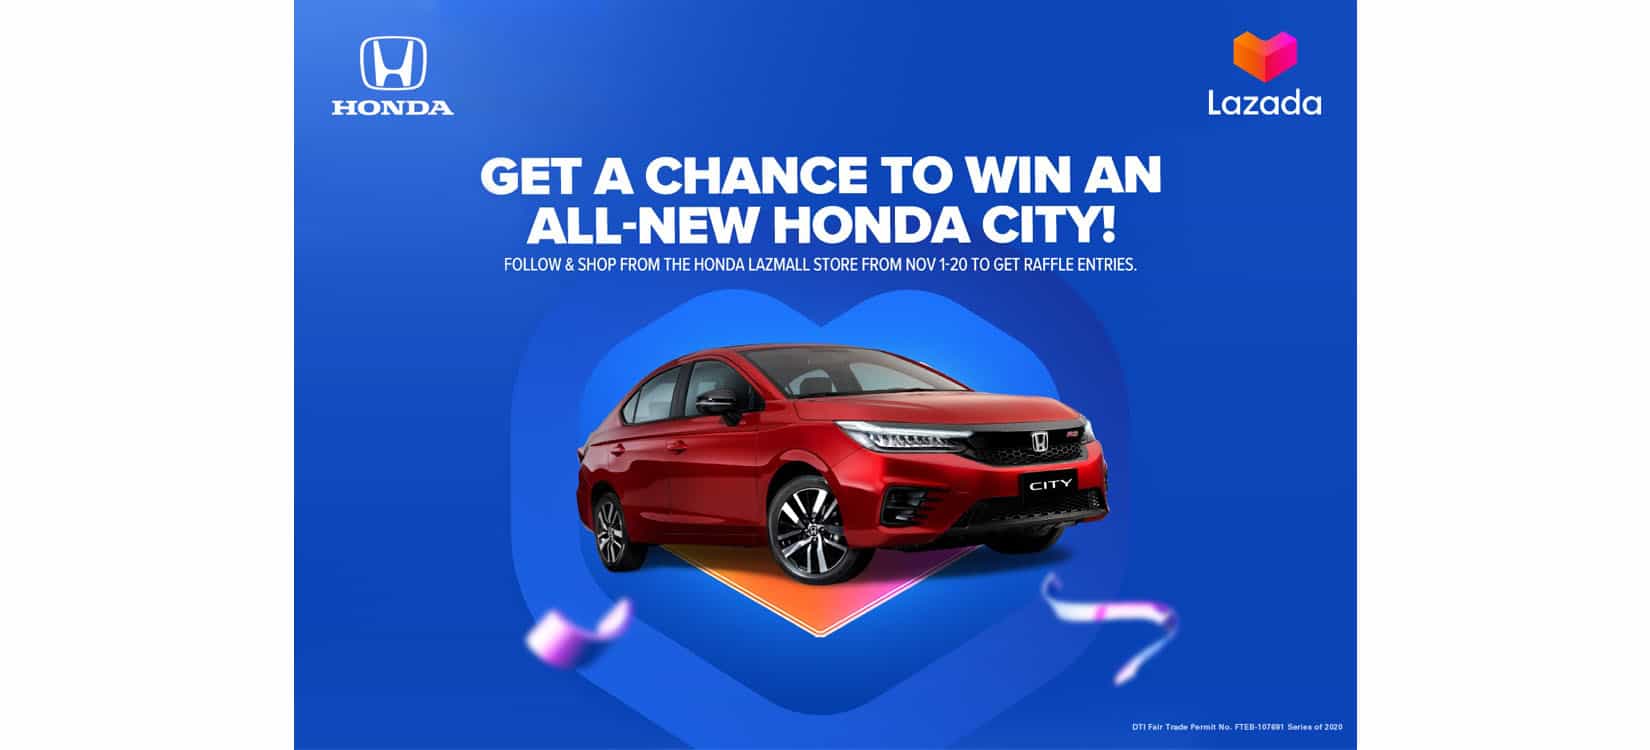 Honda officially announces its LazMall Flagship Store on Lazada - All-New Honda City to be raffled off this 11.11 sale